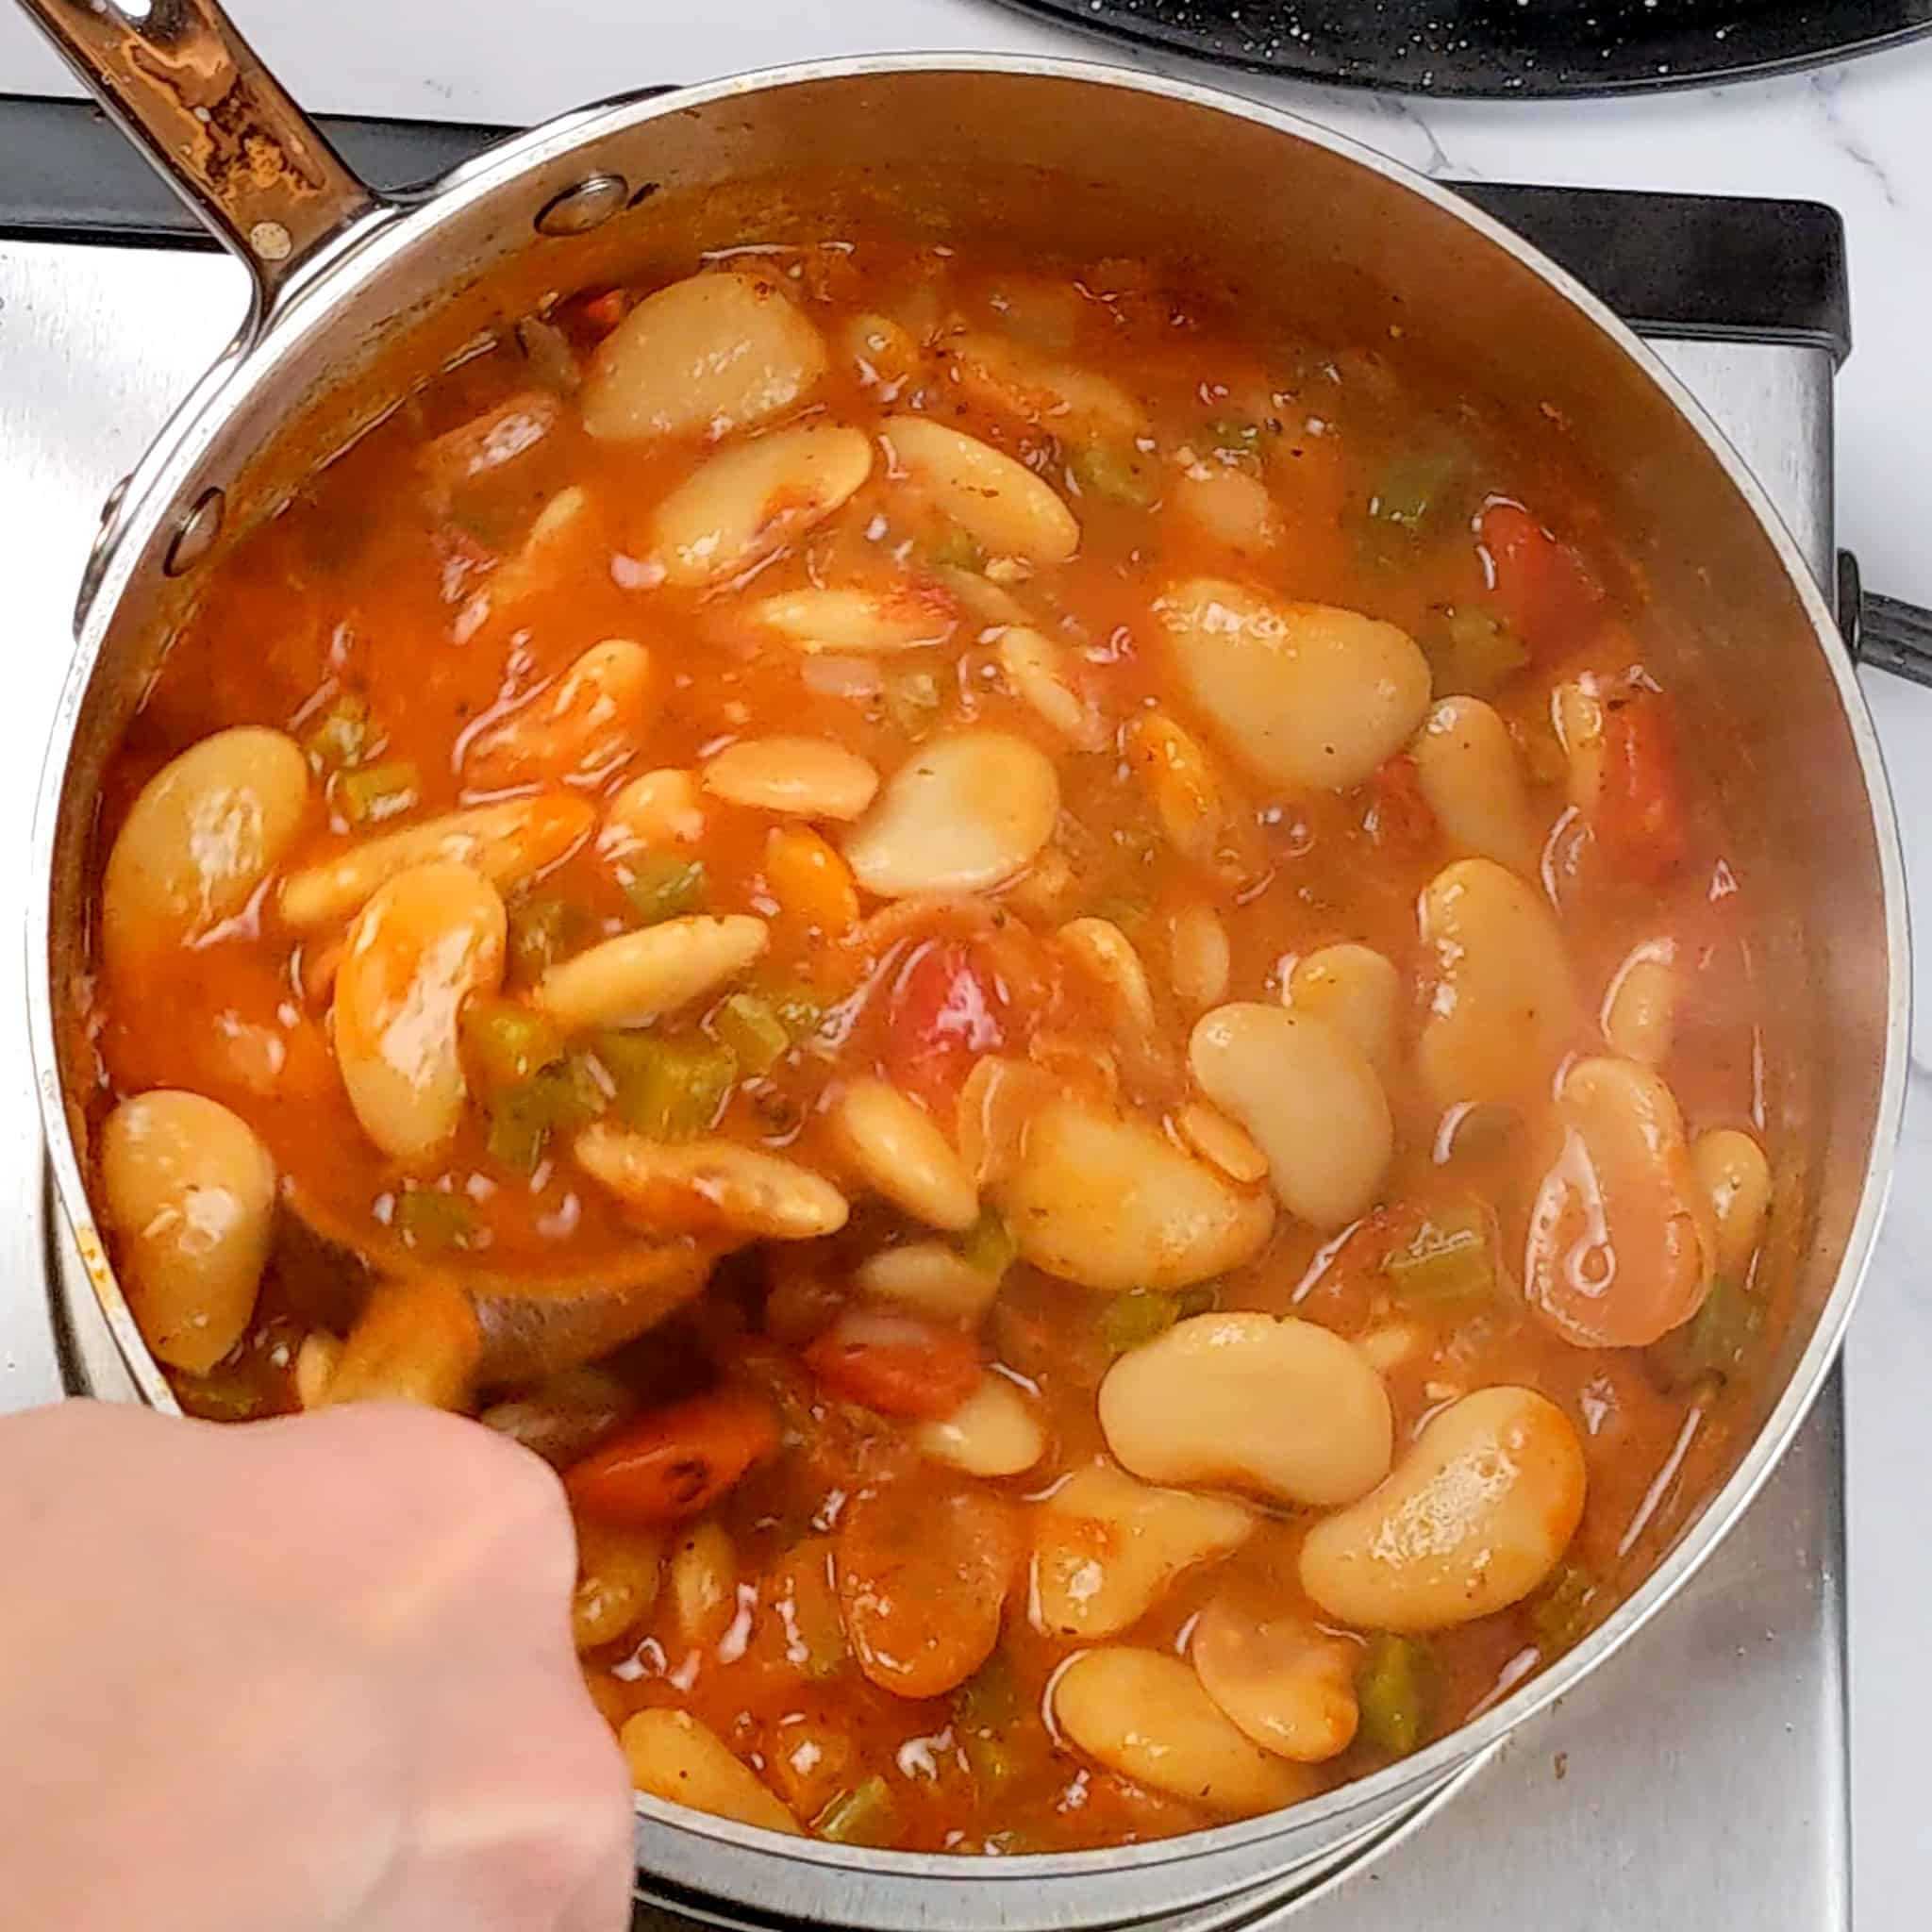 tomato sauce simmering with butter beans in a sauce pan being stirred with a wooden spoon